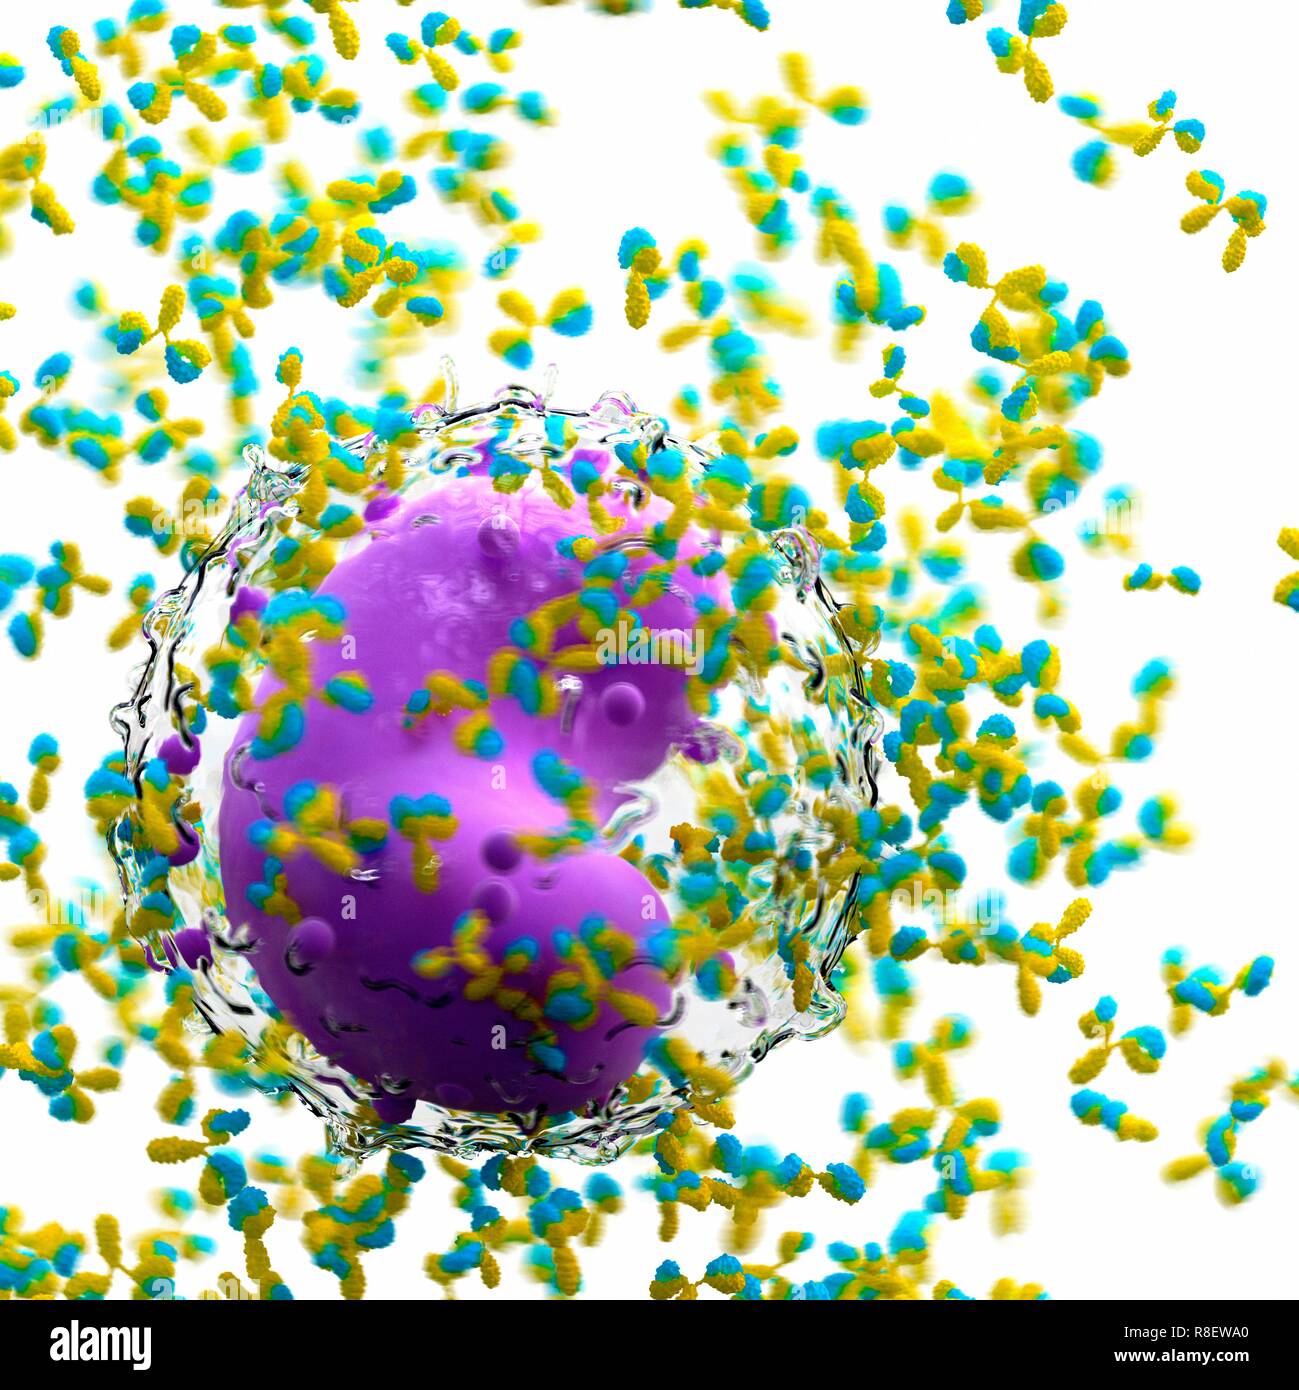 Illustration of a leucocyte and antibodies. Stock Photo